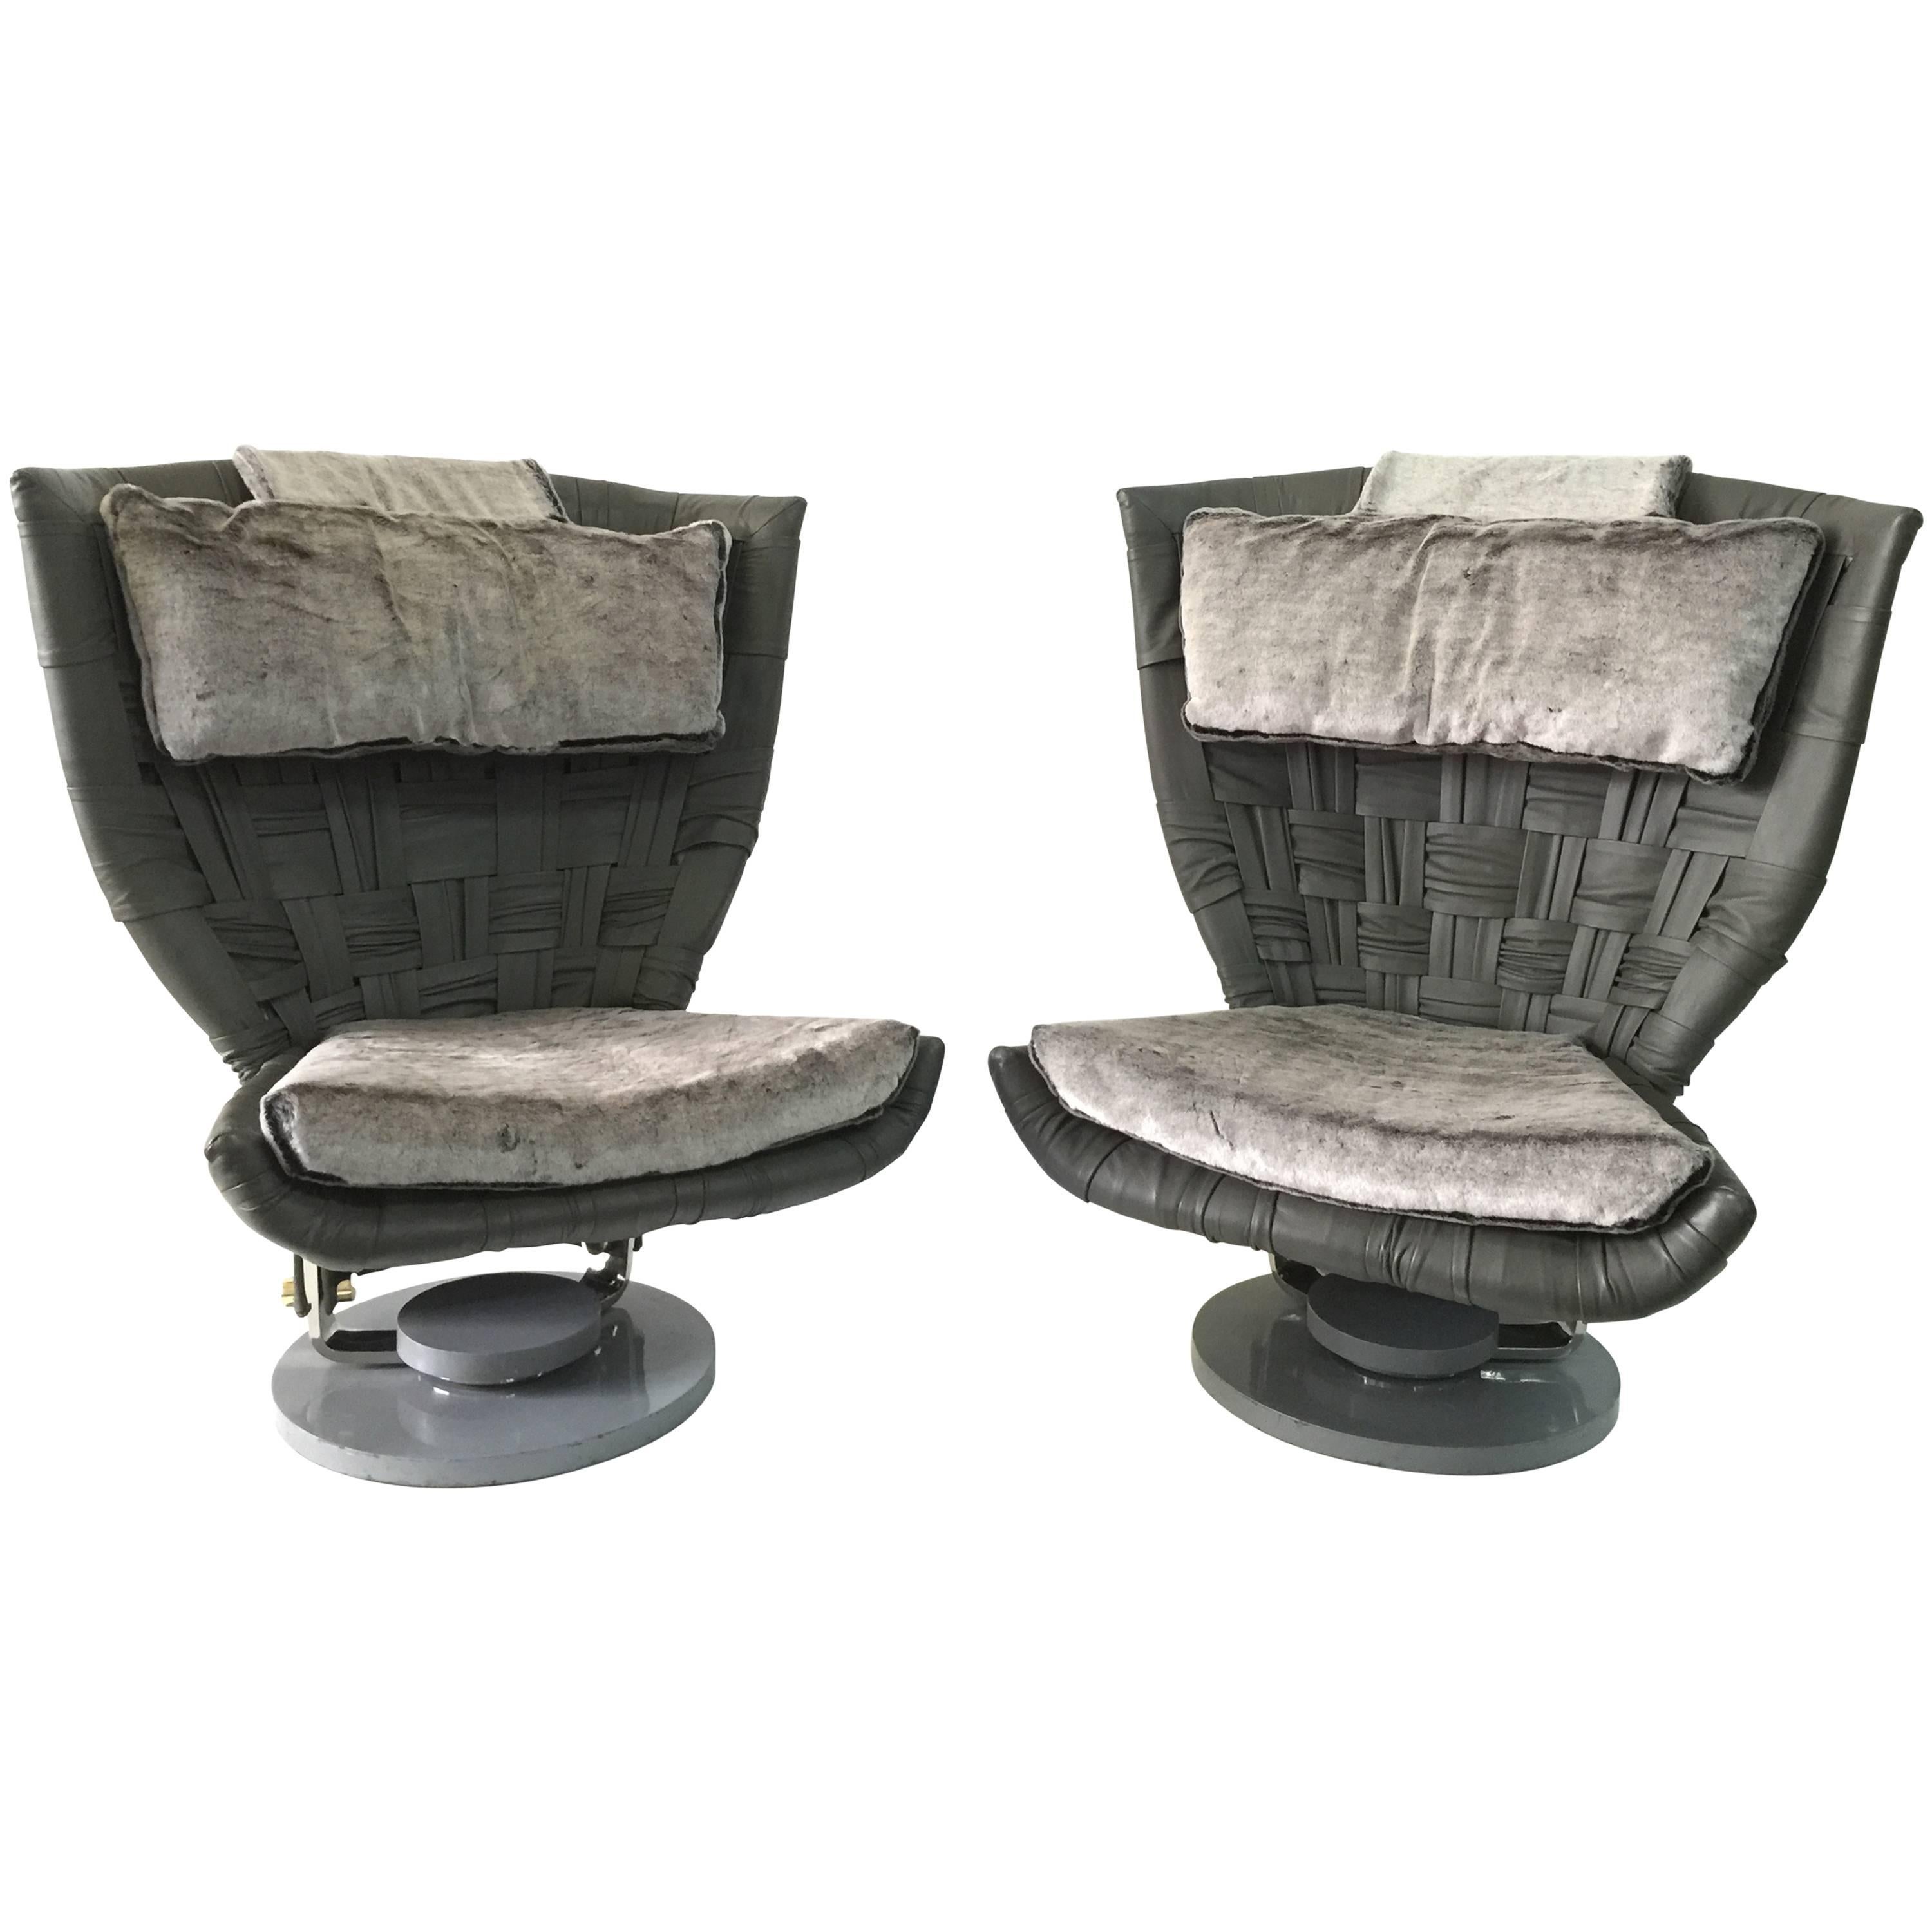 Marzio Cecchi Pair of Grey Woven Leather Swivel Chairs 